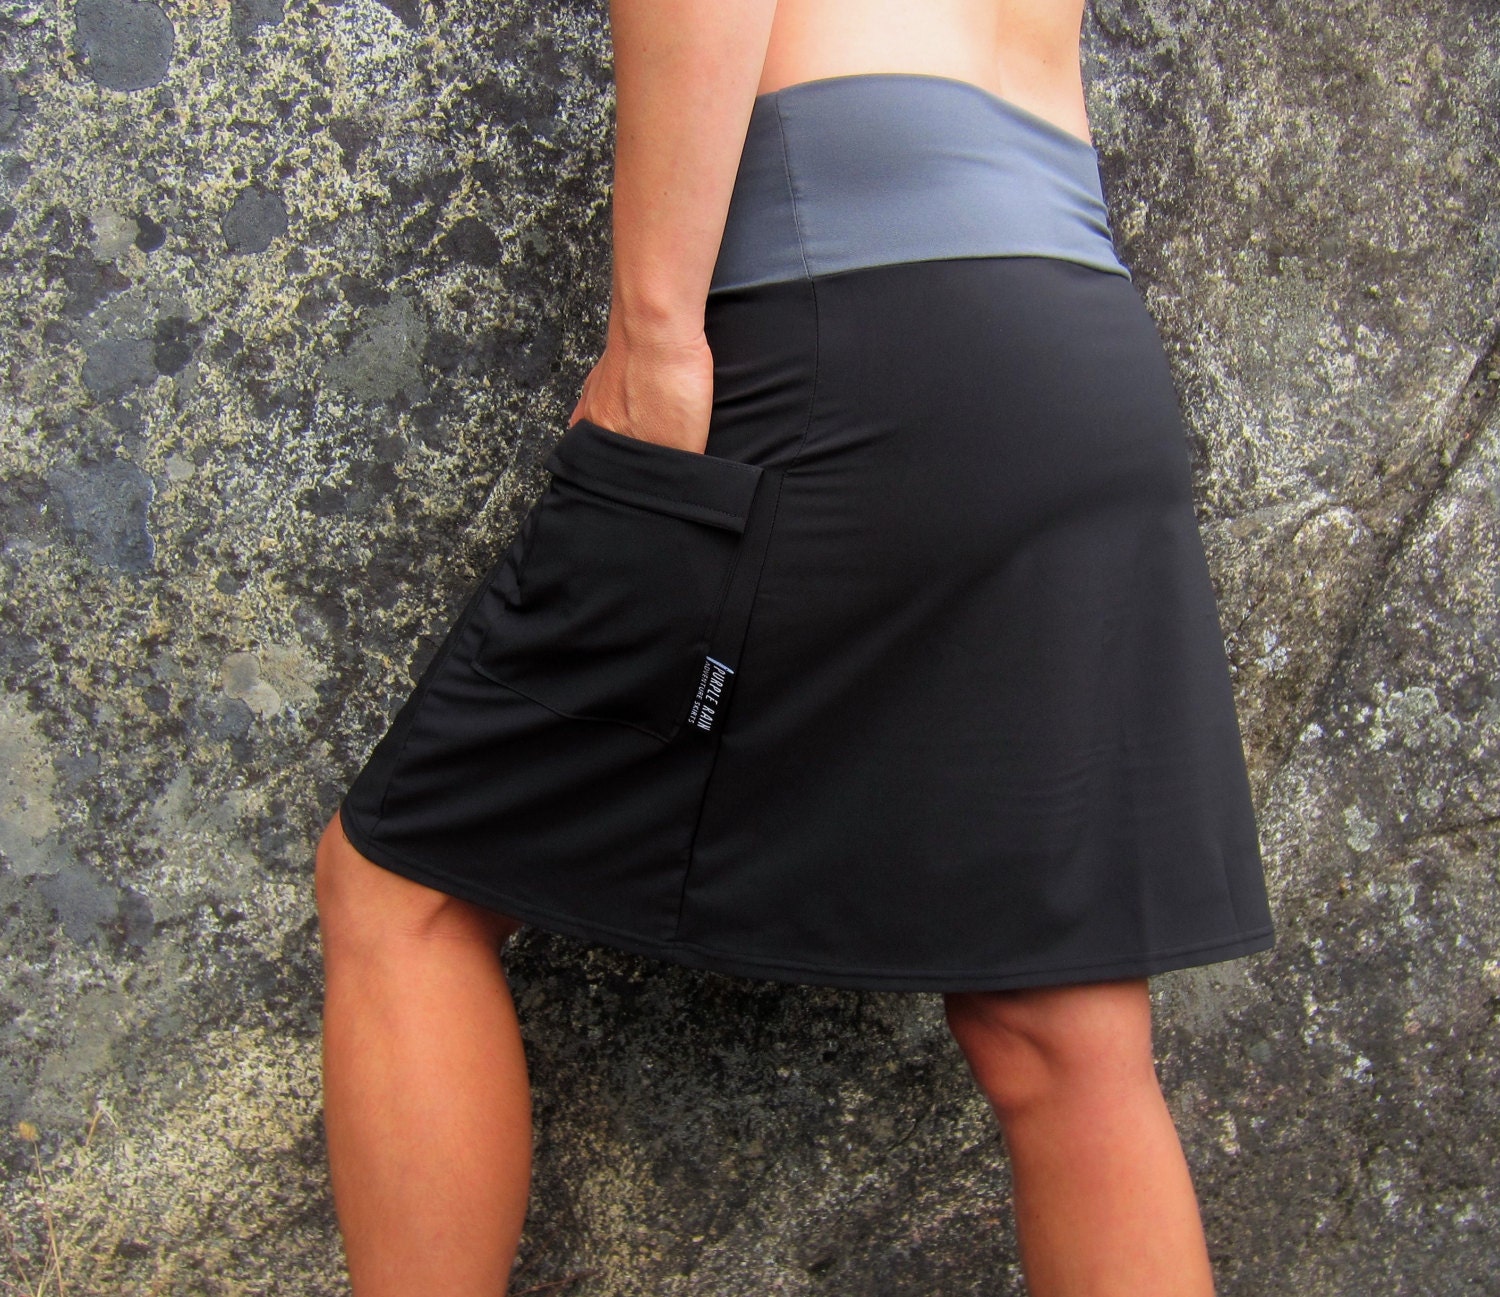 Activewear Hiking Skirts with yoga style waistband and side